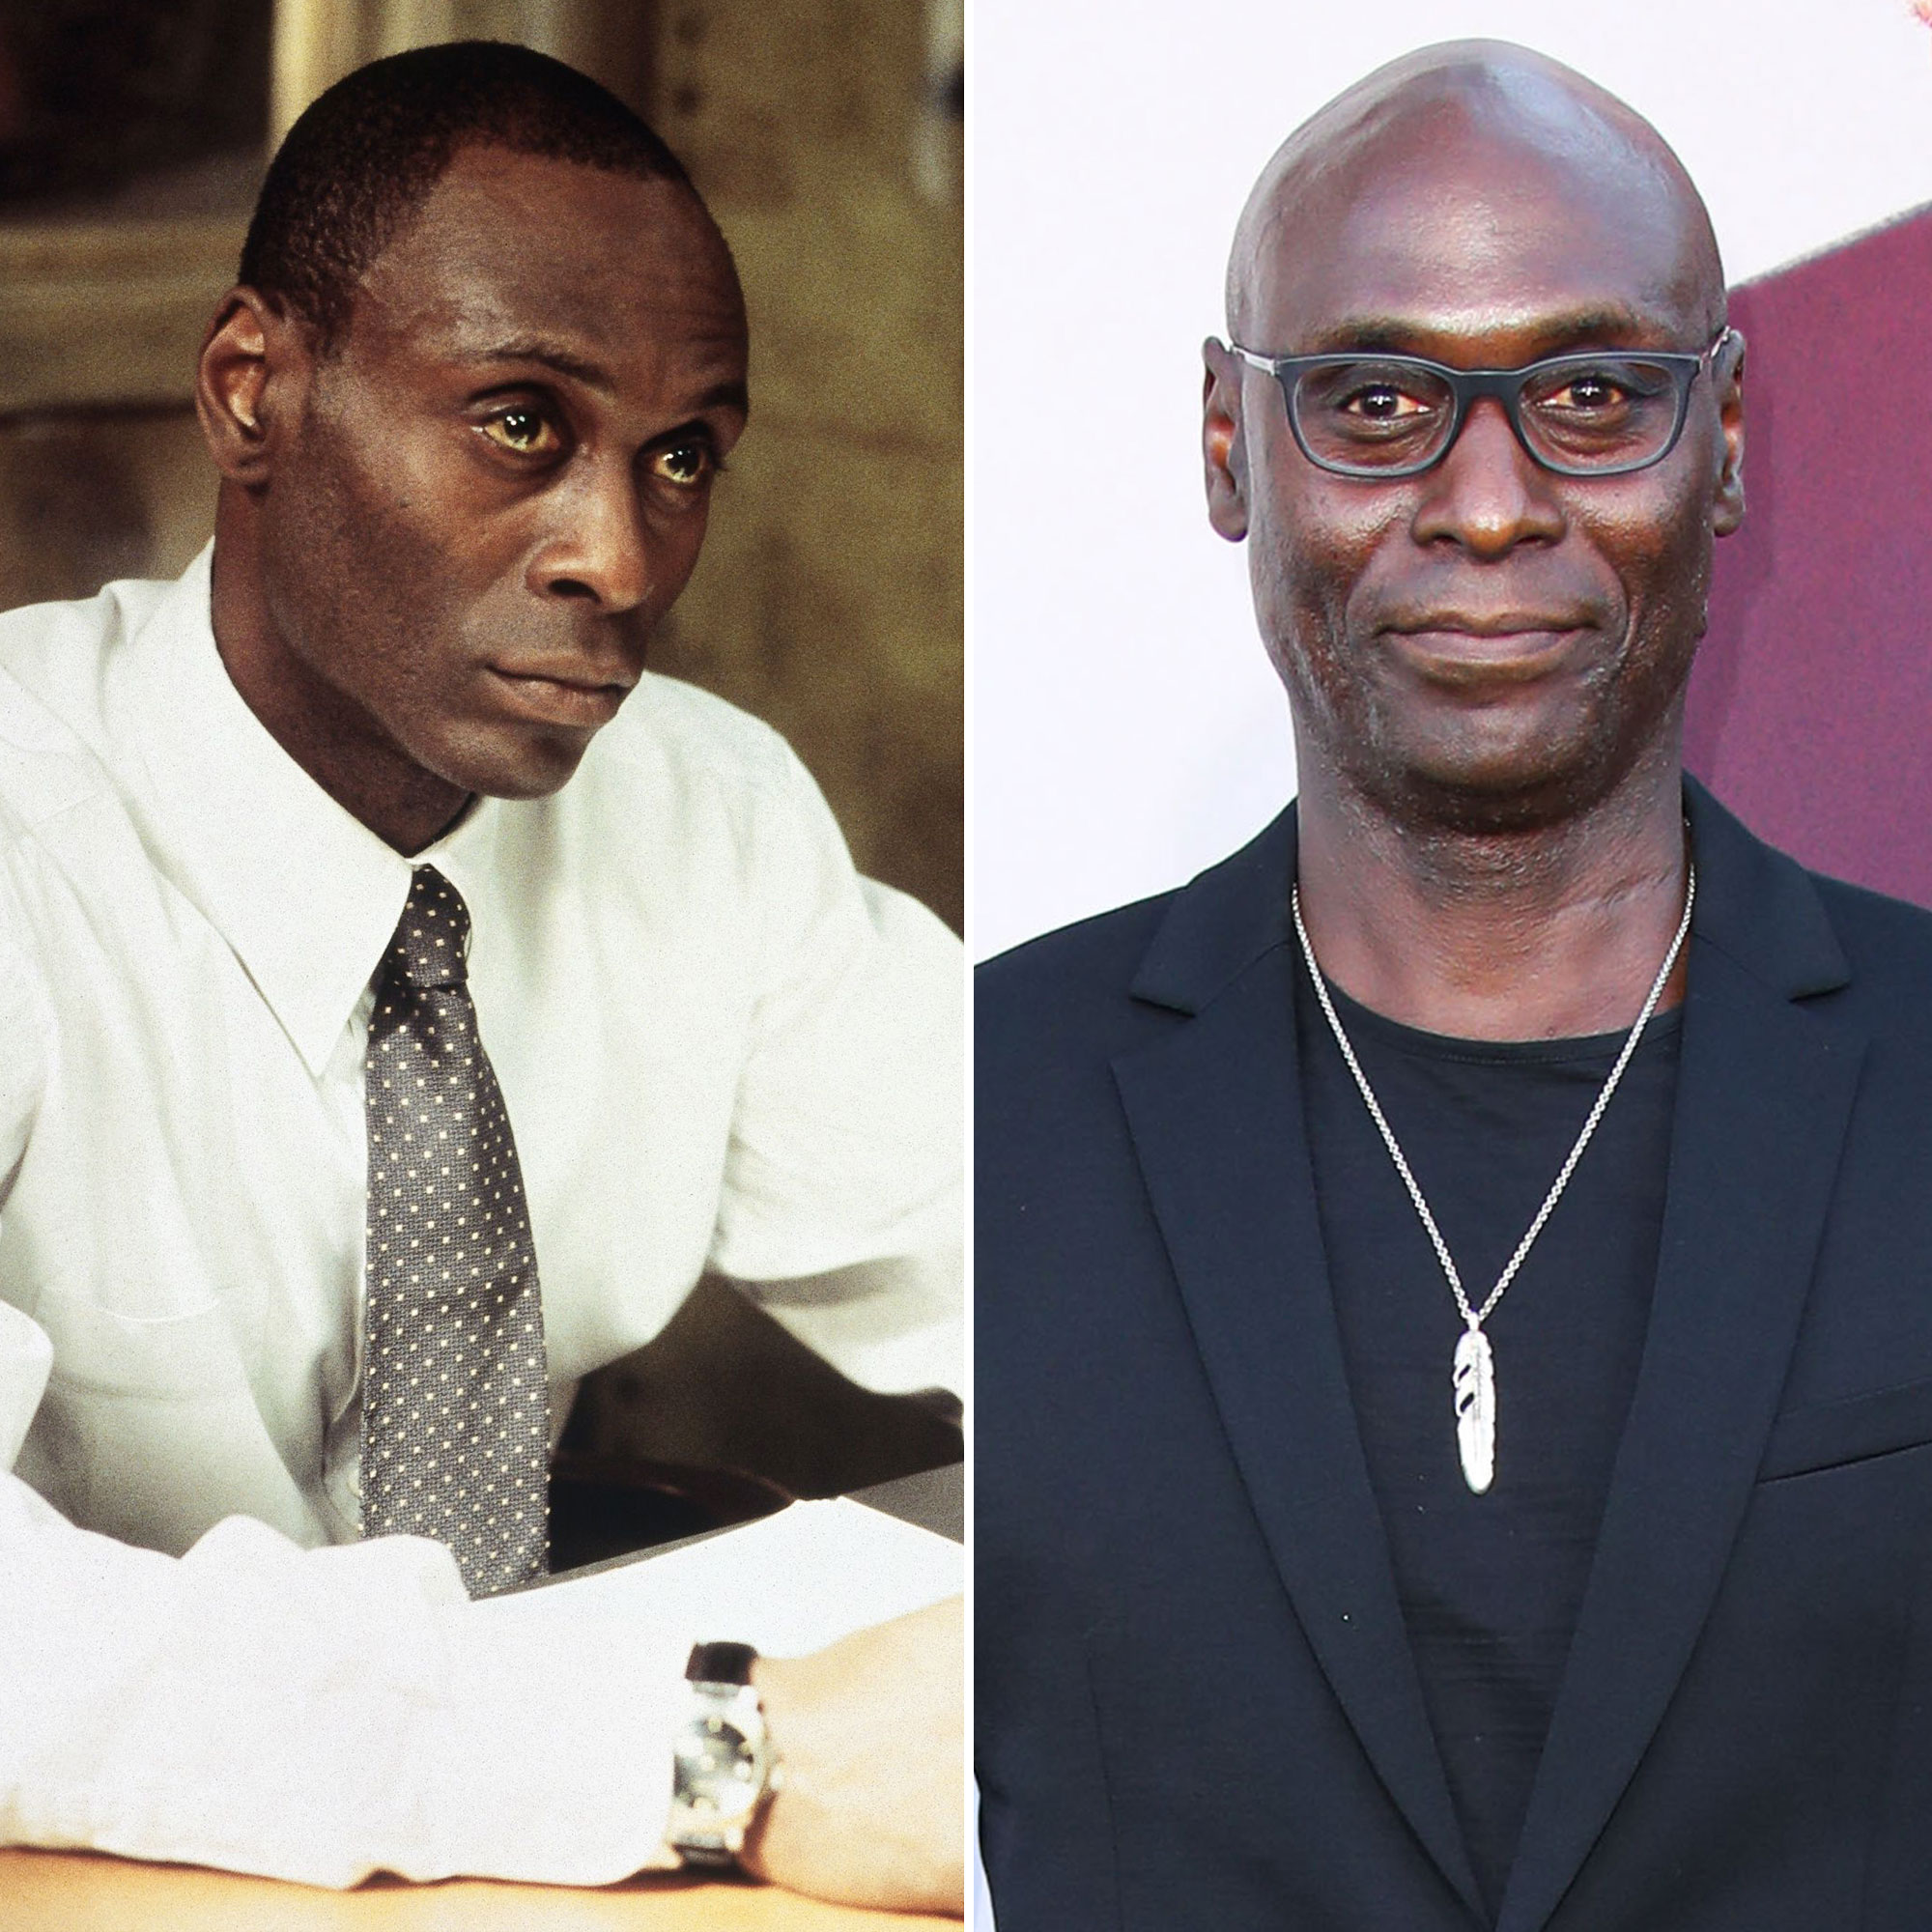 Cast of 'The Wire': Where Are They Now?